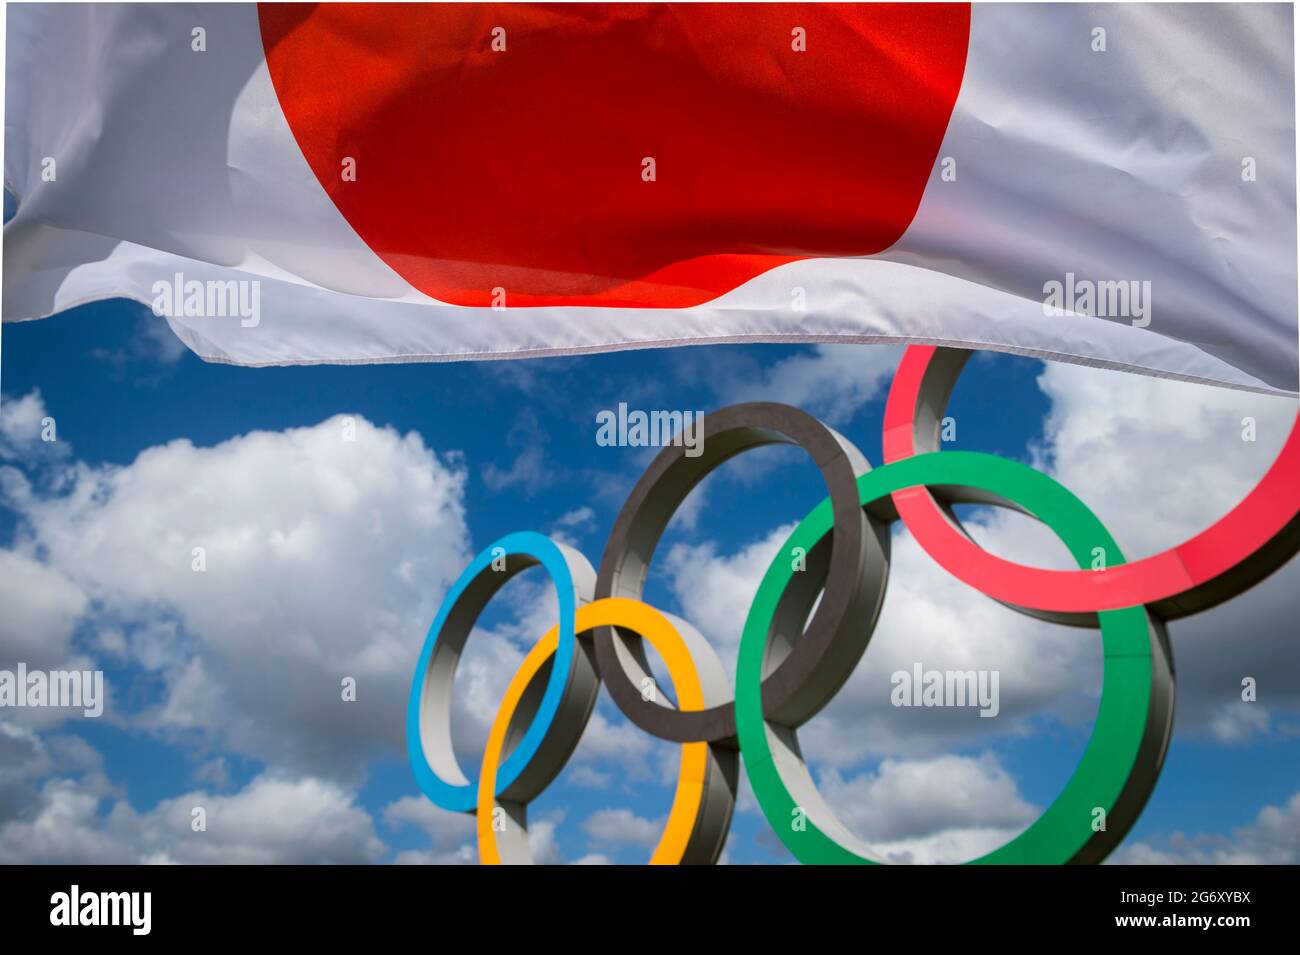 RIO DE JANEIRO - MARCH, 2016: A Japanese flag flutters in the wind in front of Olympic Rings standing under bright blue sky. Stock Photo